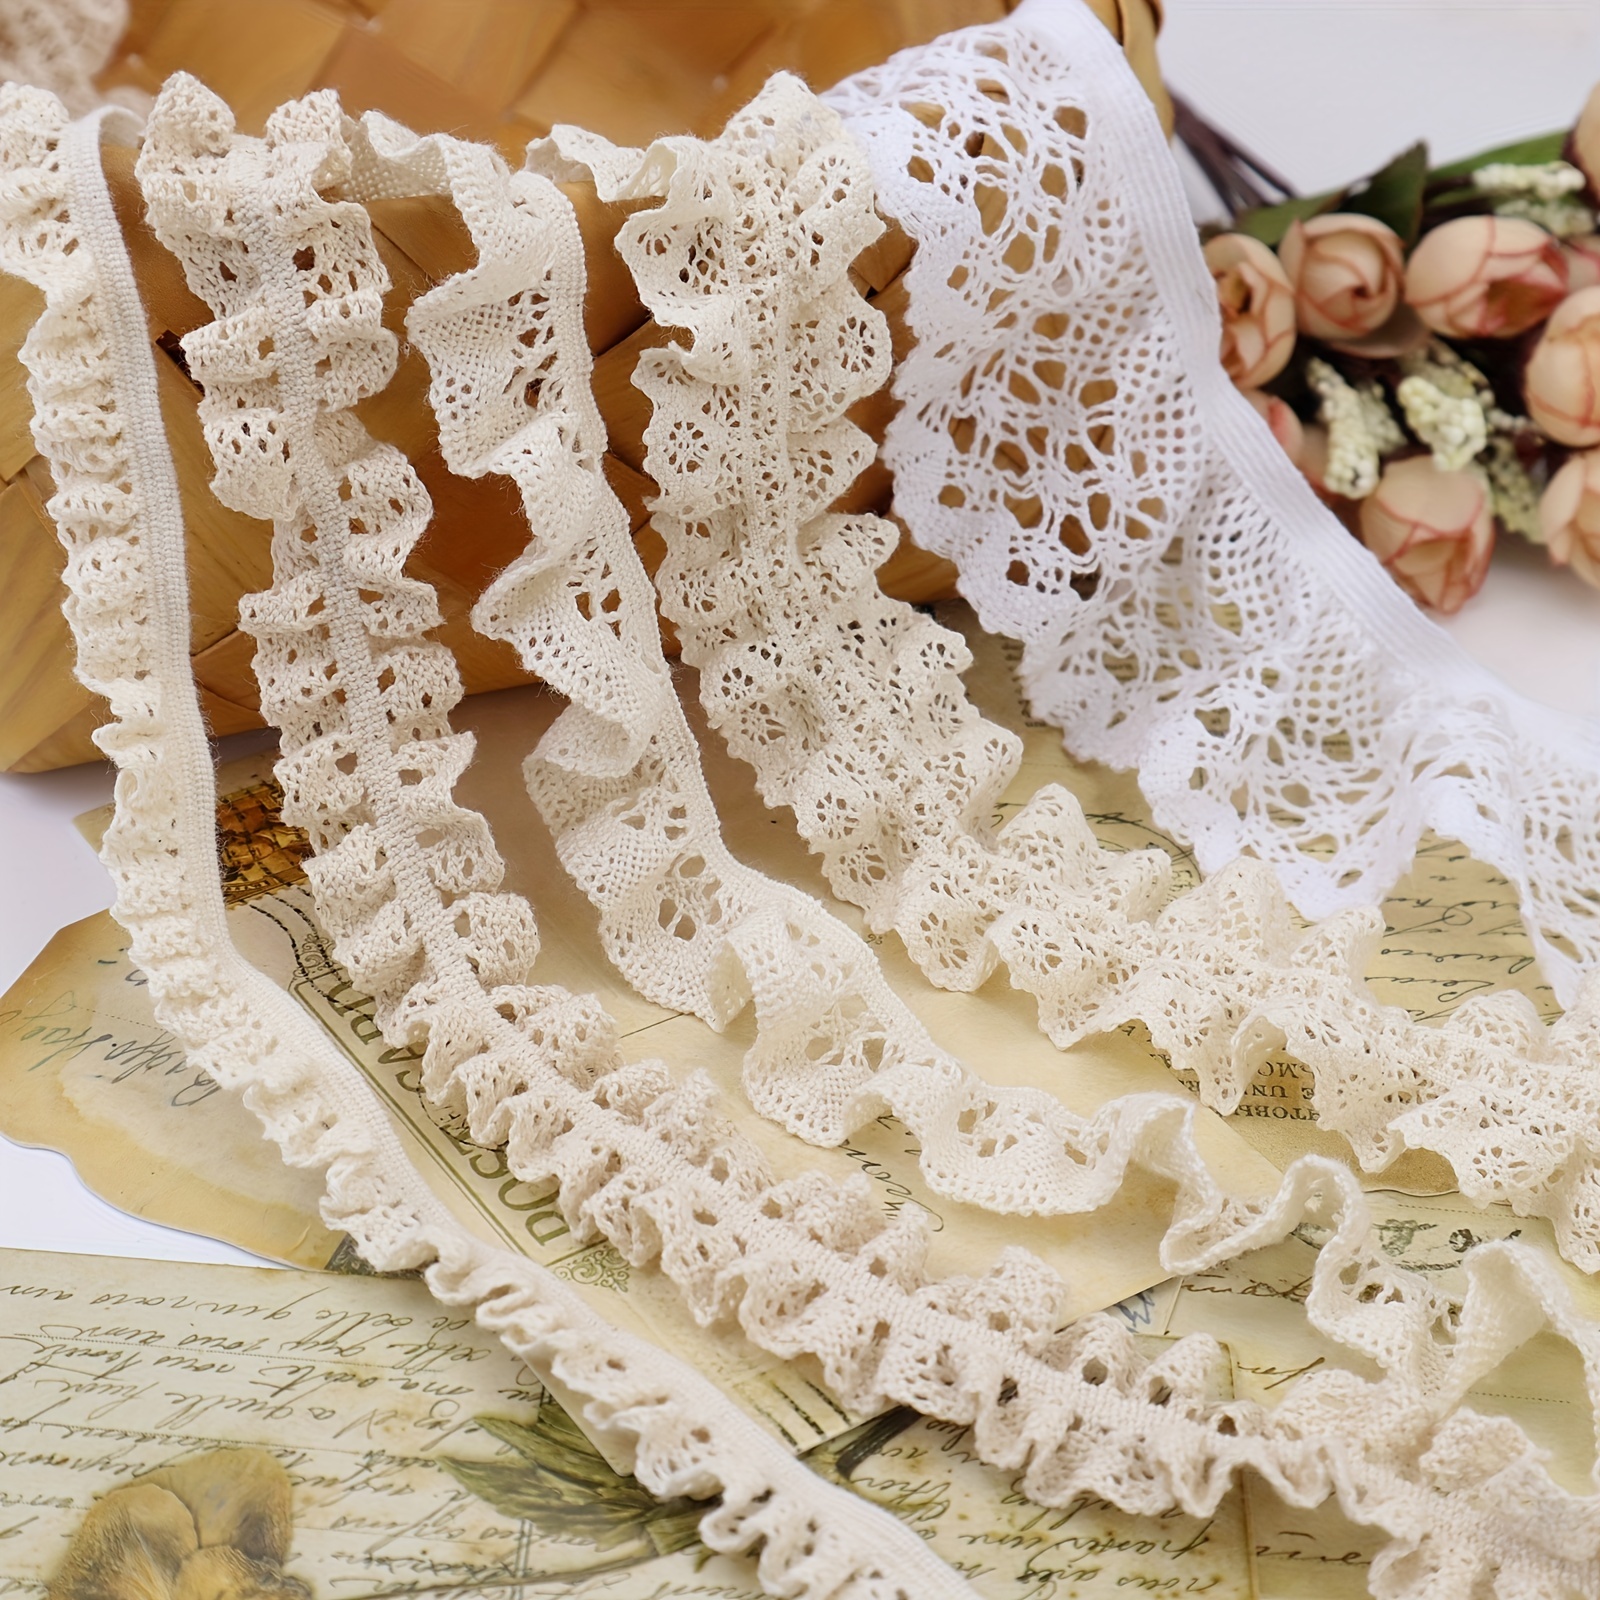  Stretch Lace Trim Elastic-Frilly Trim for Socks-Delicate Lace  Ribbon for Craft-Gathered Crocheted Lace Trim DIY Craft Ribbon (5Yards  Vintage Elastic lace Trim)